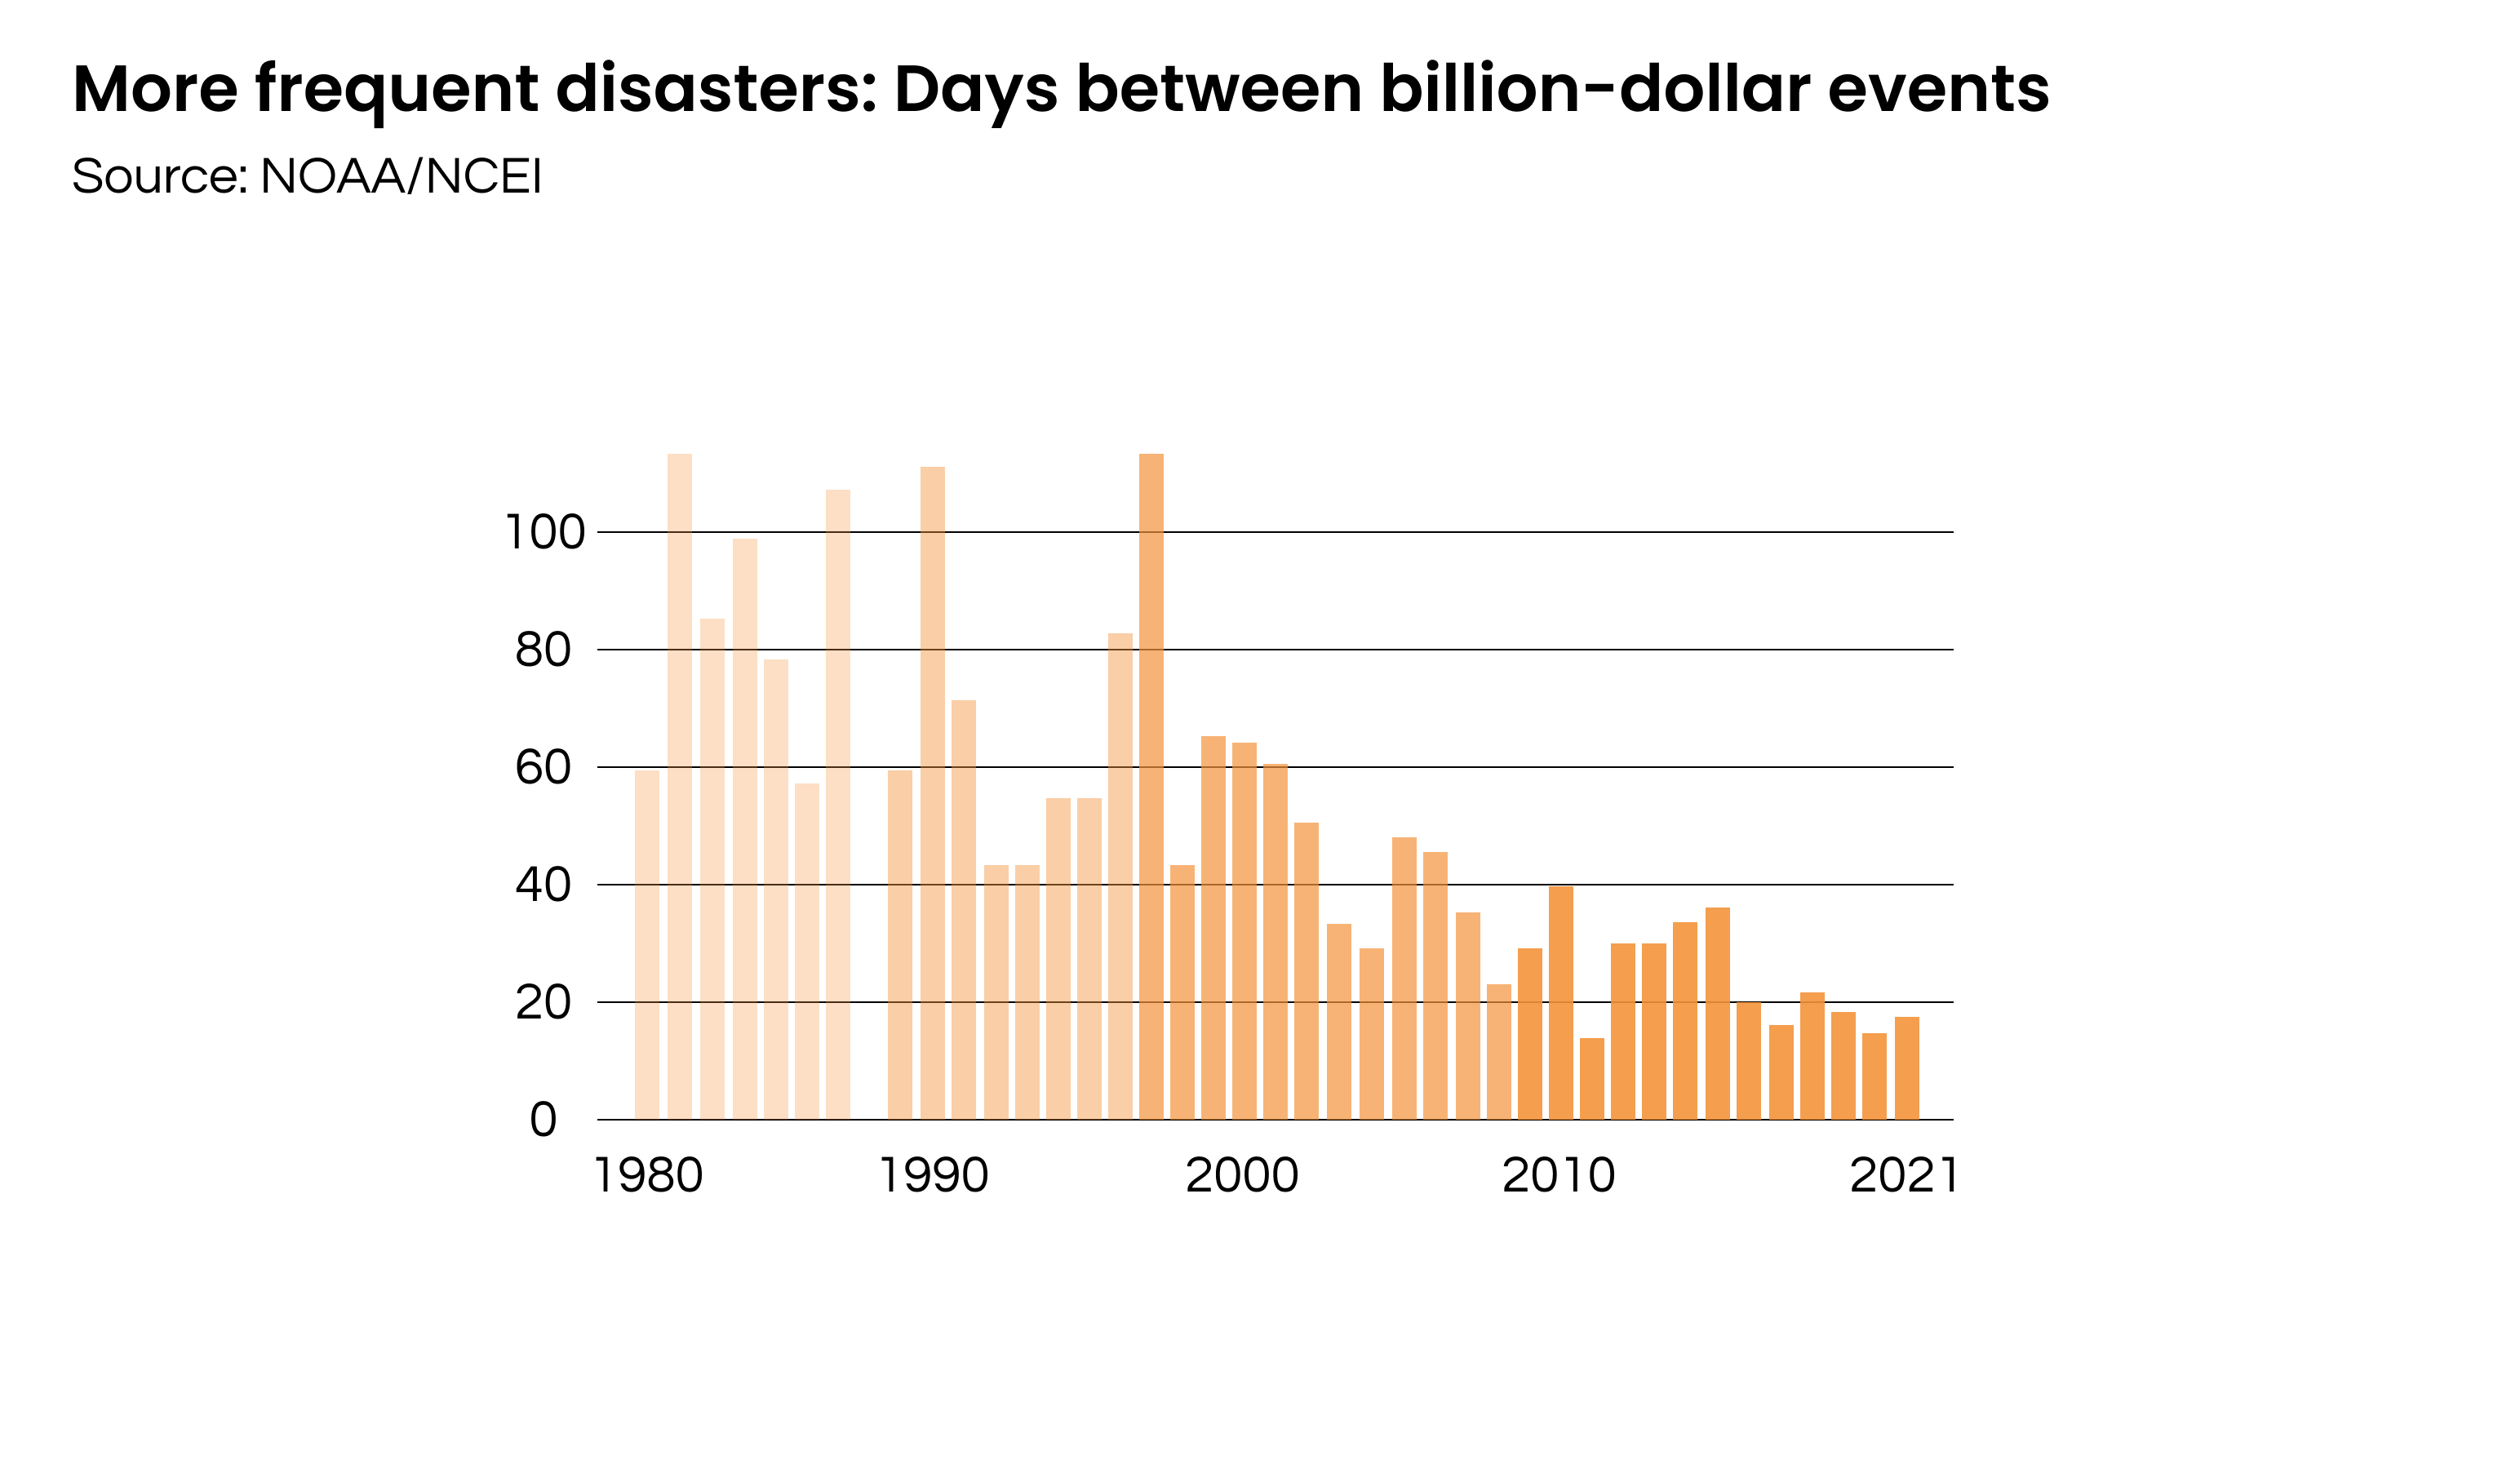 Figure 1. More frequent climate related disasters